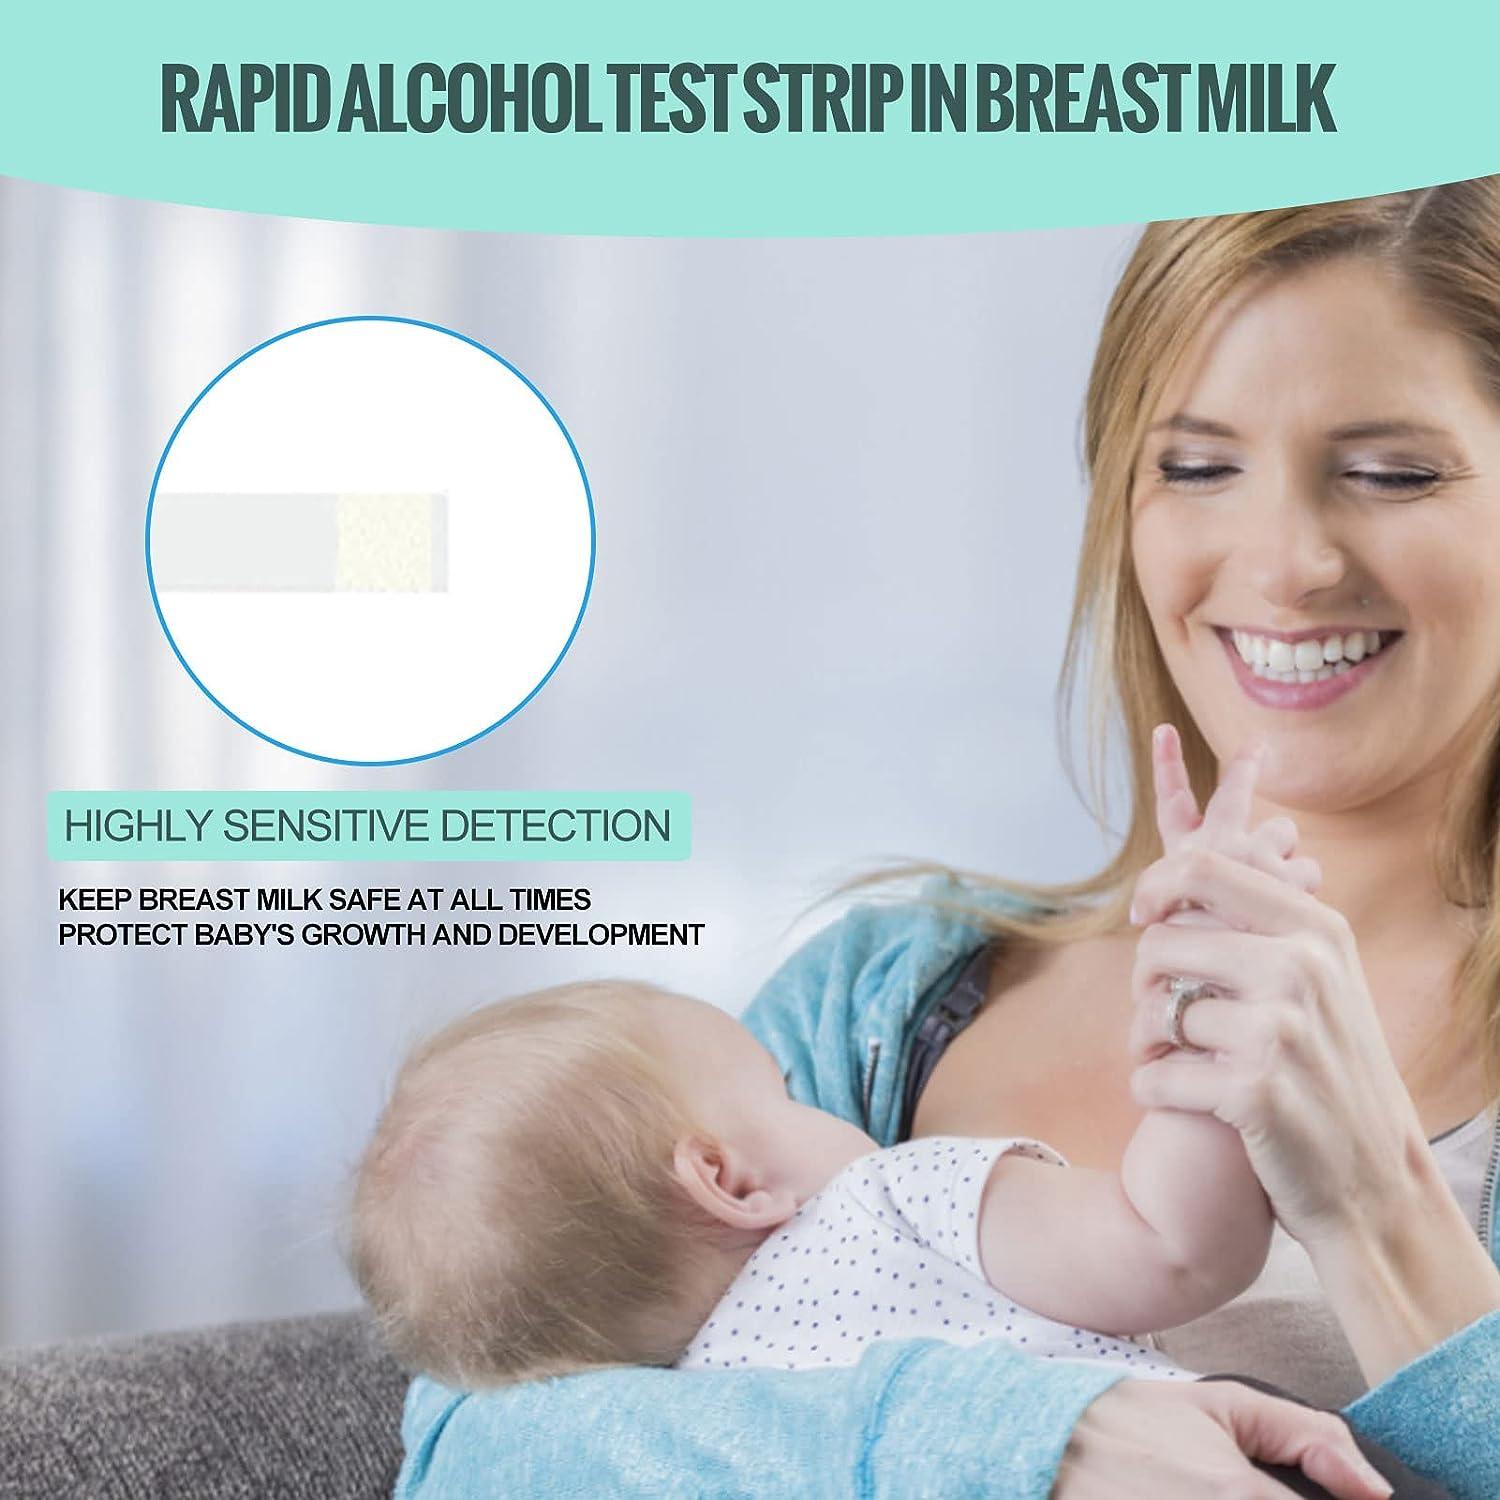 Home Alcohol Tests for Breastfeeders: The Milkscreen